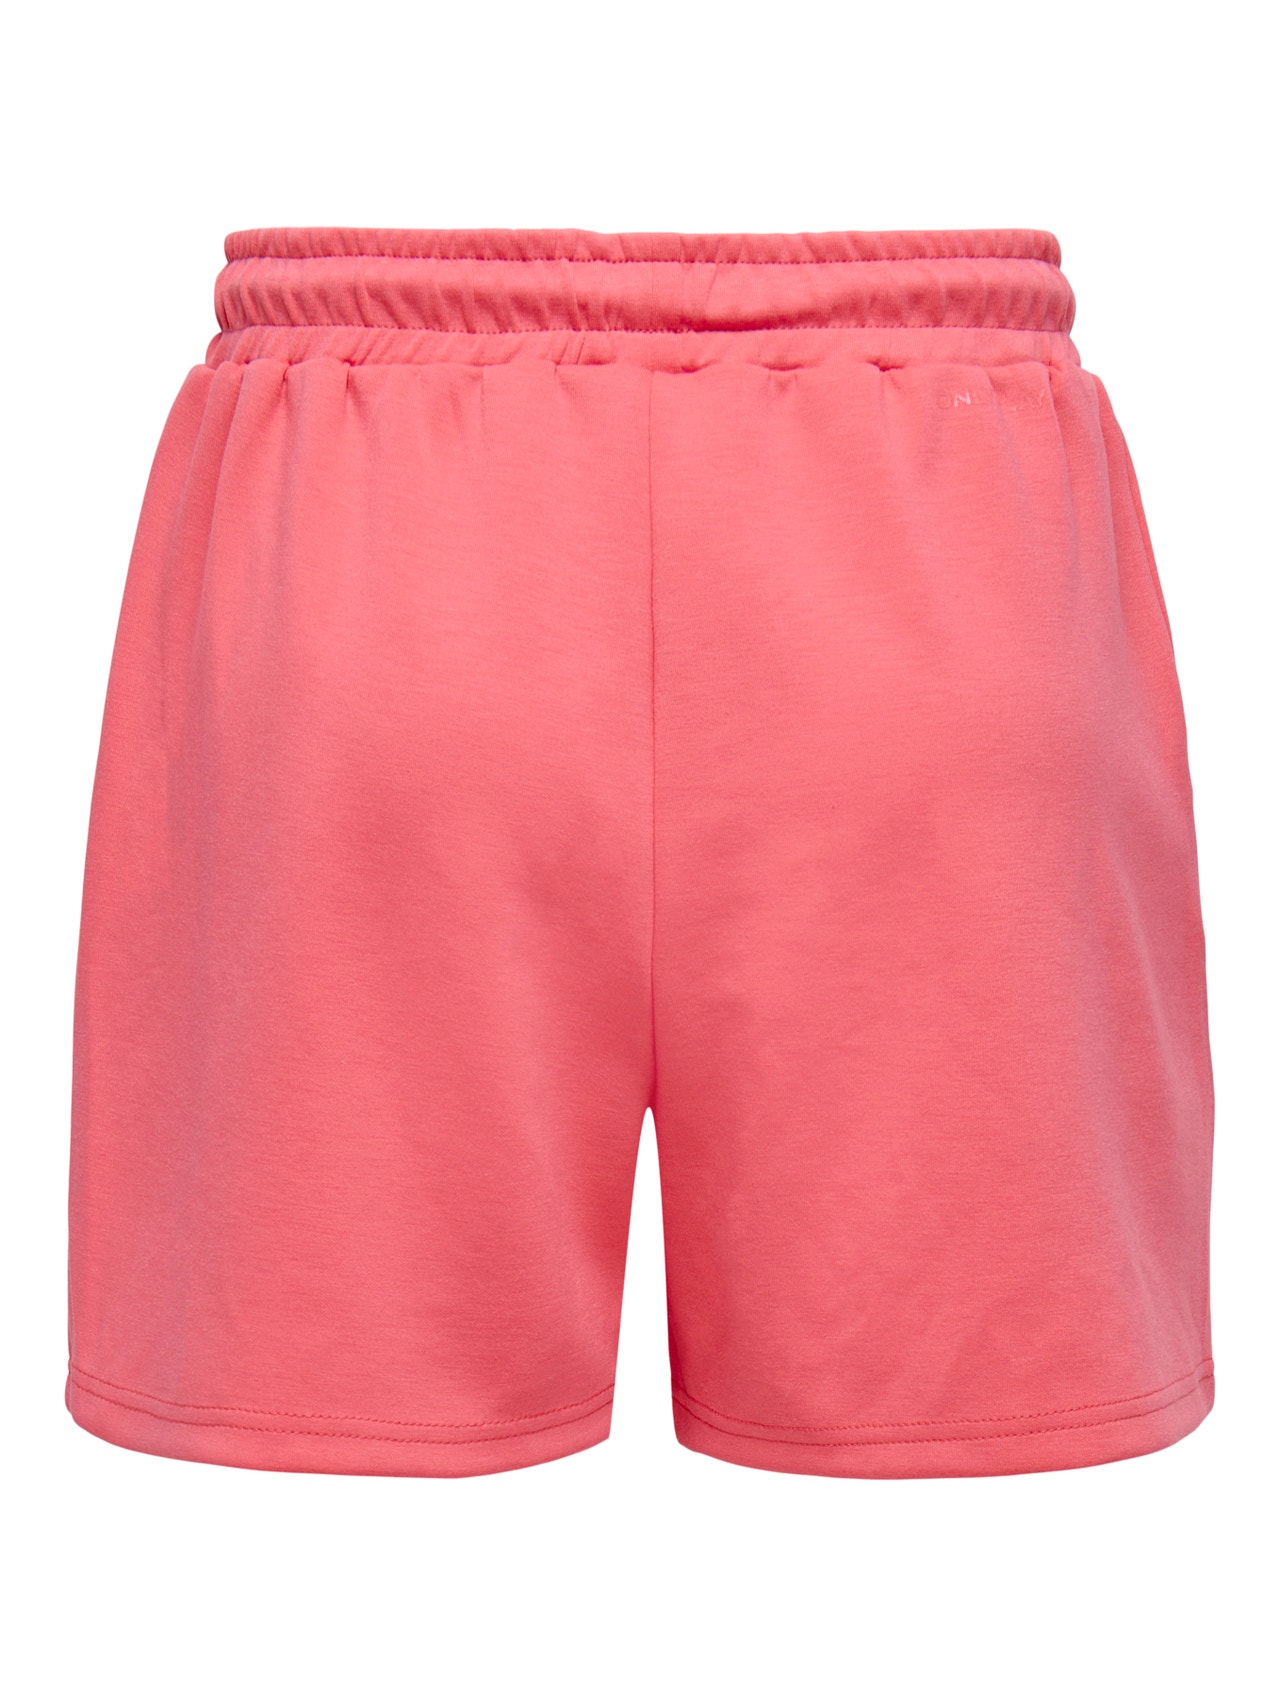 ONLY Loose Fit High waist Shorts -Sun Kissed Coral - 15245851